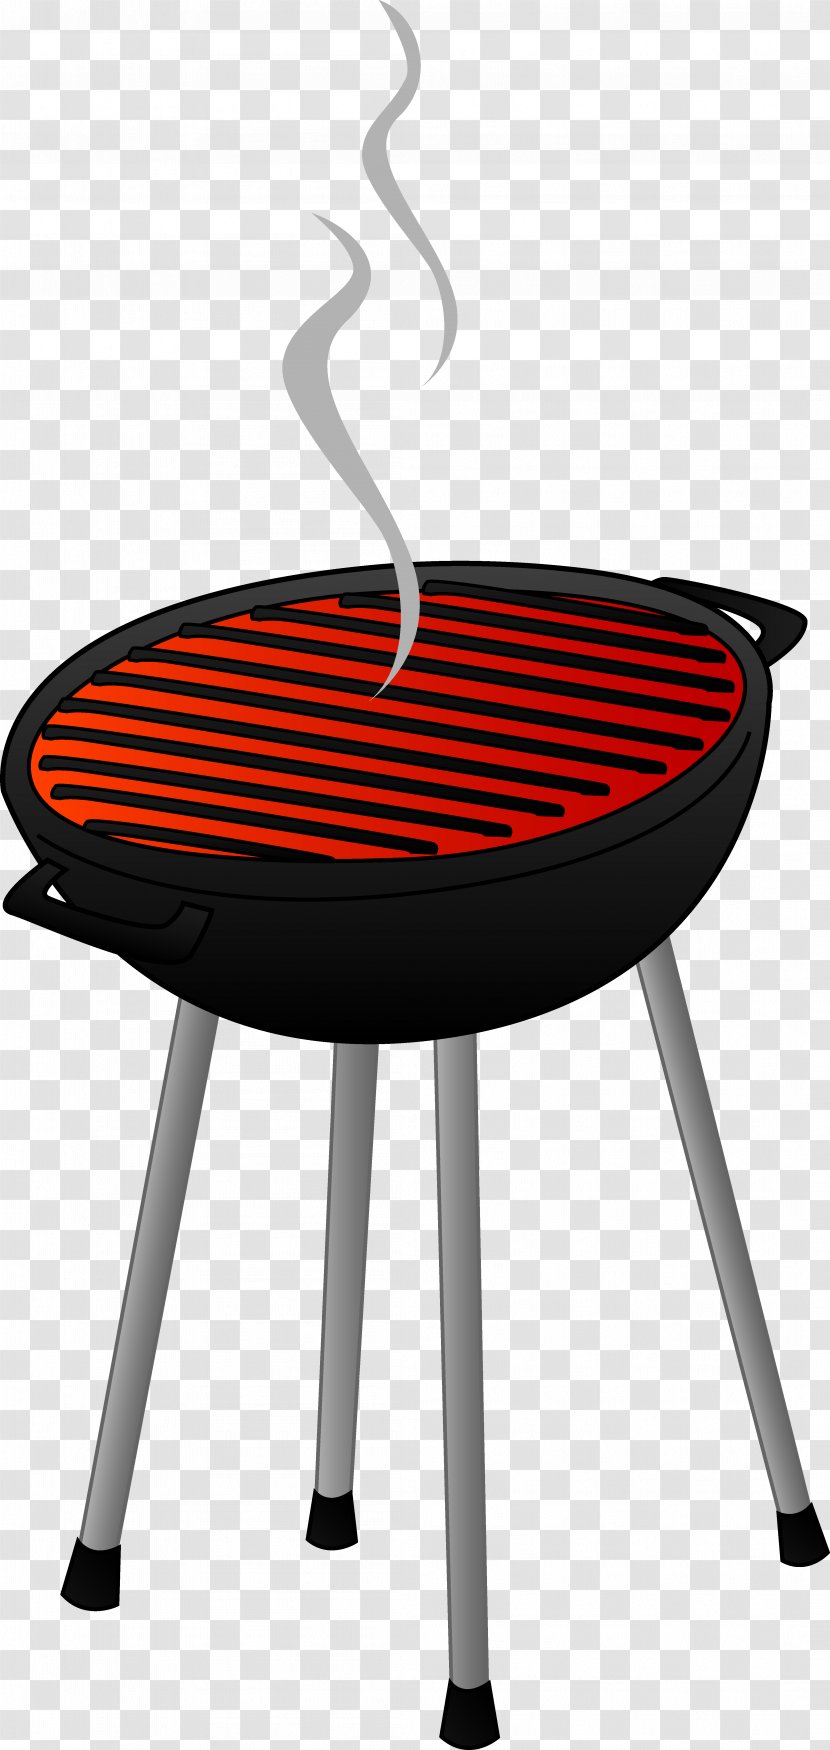 Barbecue Sauce Grilling Clip Art - Ribs - Utensils Transparent PNG